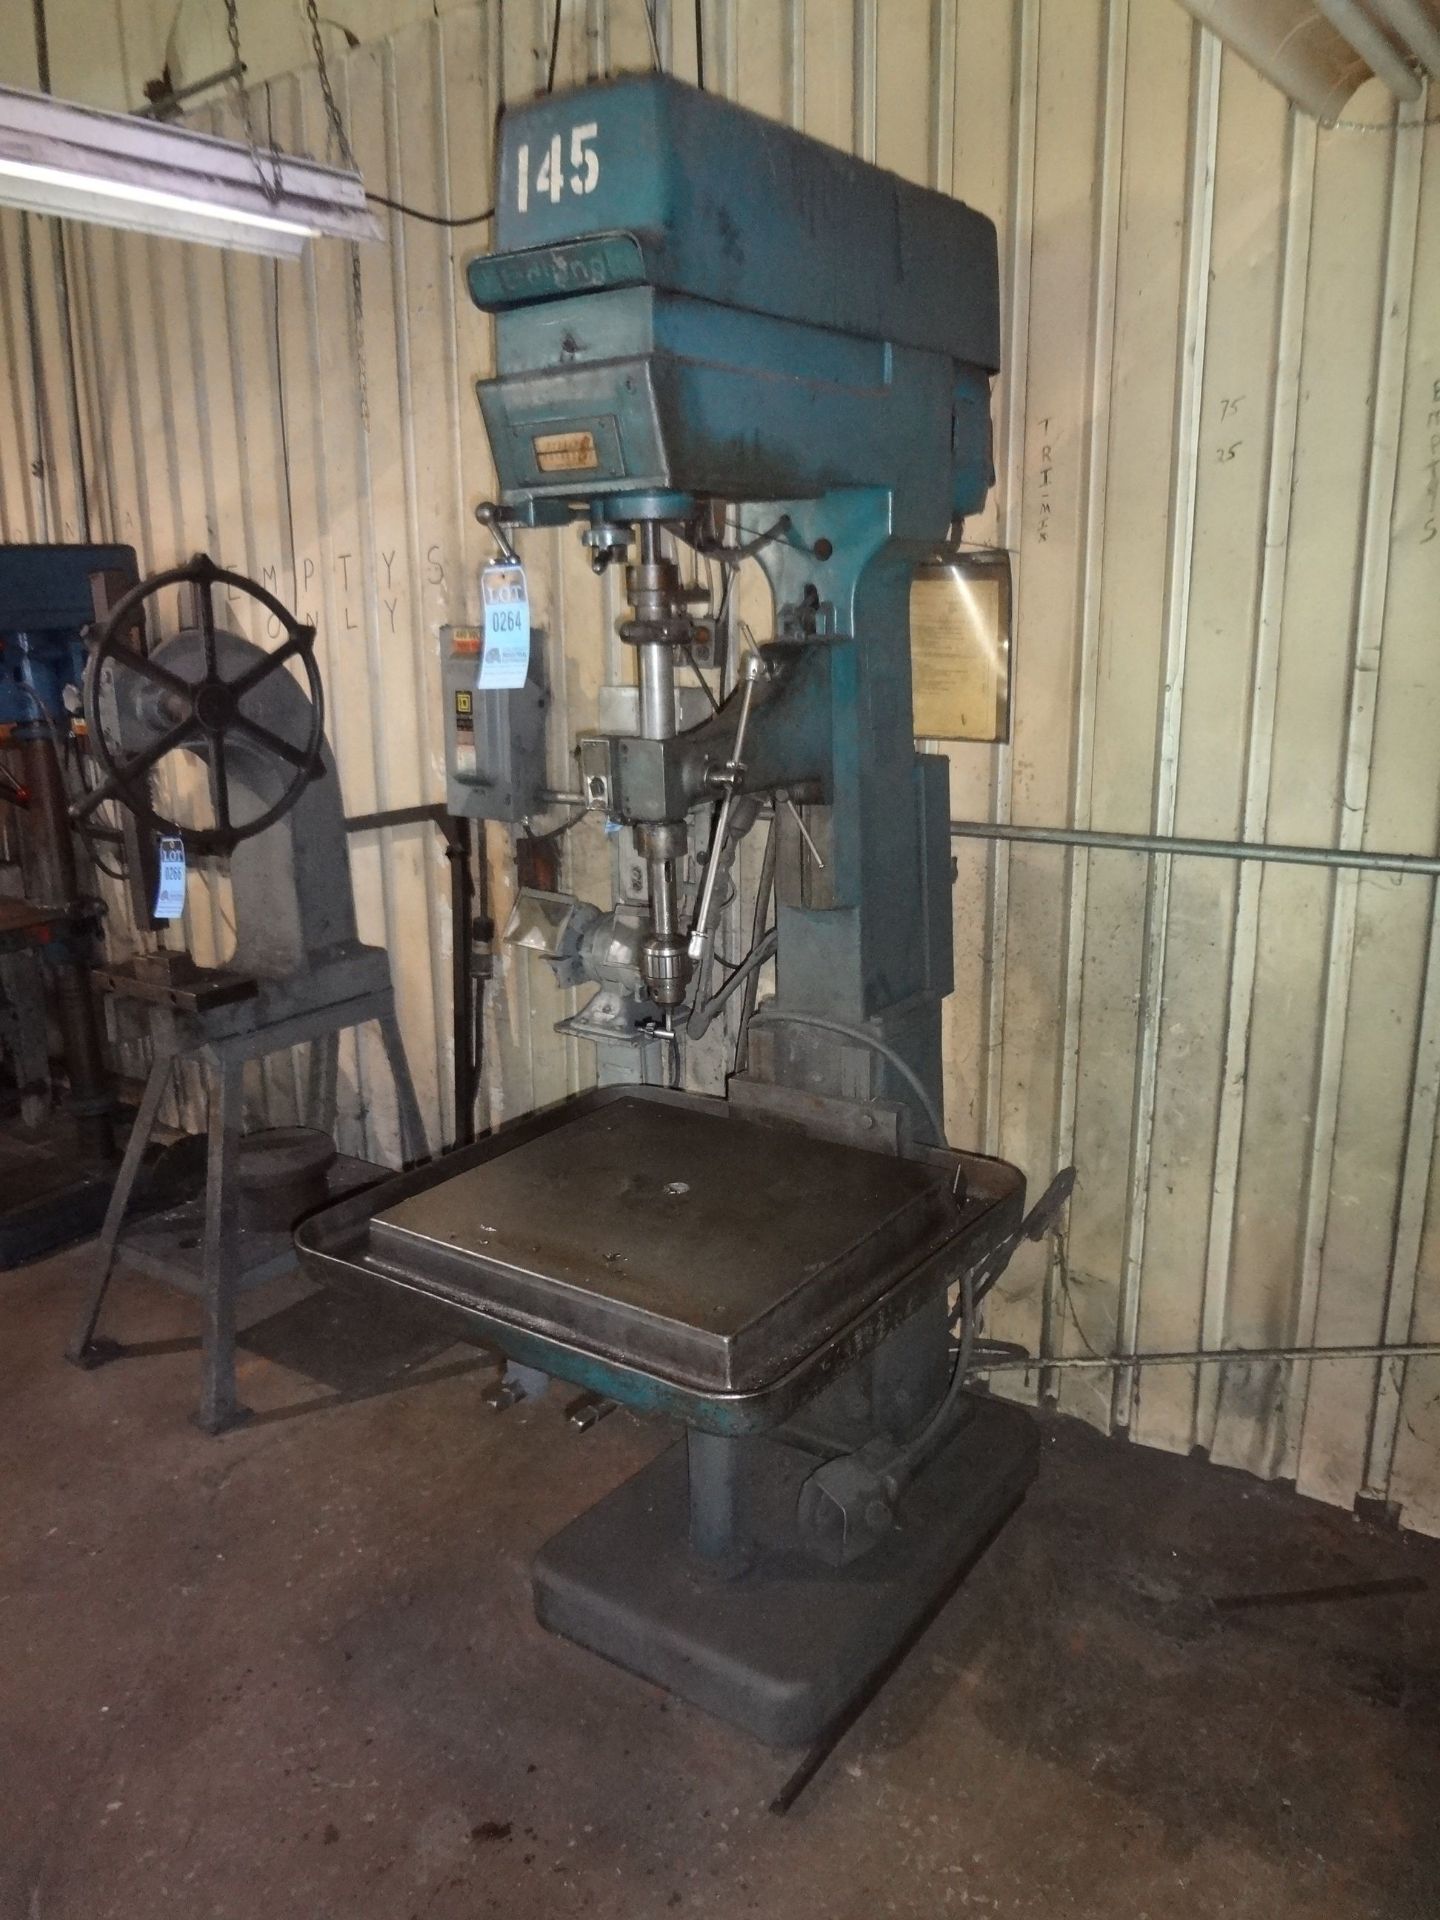 32" EDLUND MODEL 2115 TABLE DRILL; S/N N/A, 75-1,800 RPM SPINDLE SPEED, 24" X 28" TABLE